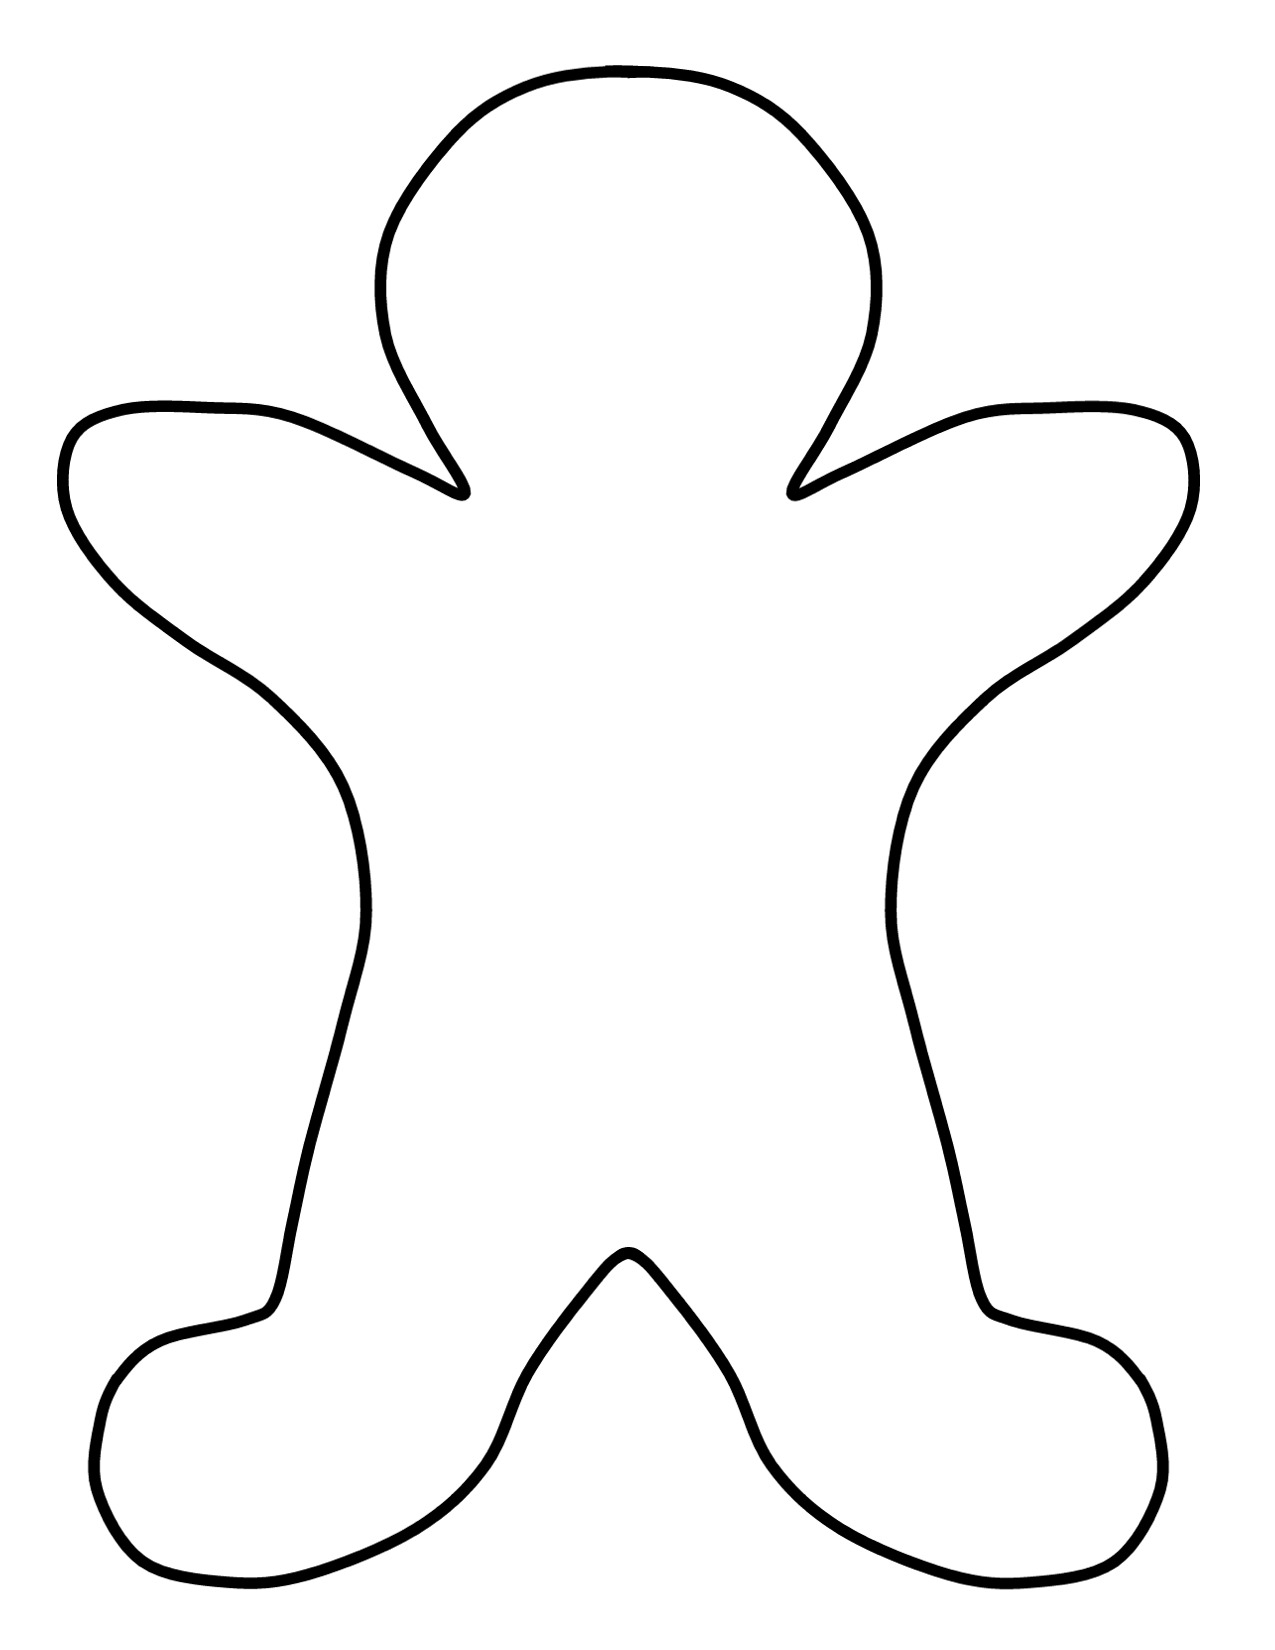 Gingerbread man black and white clipart kid 4